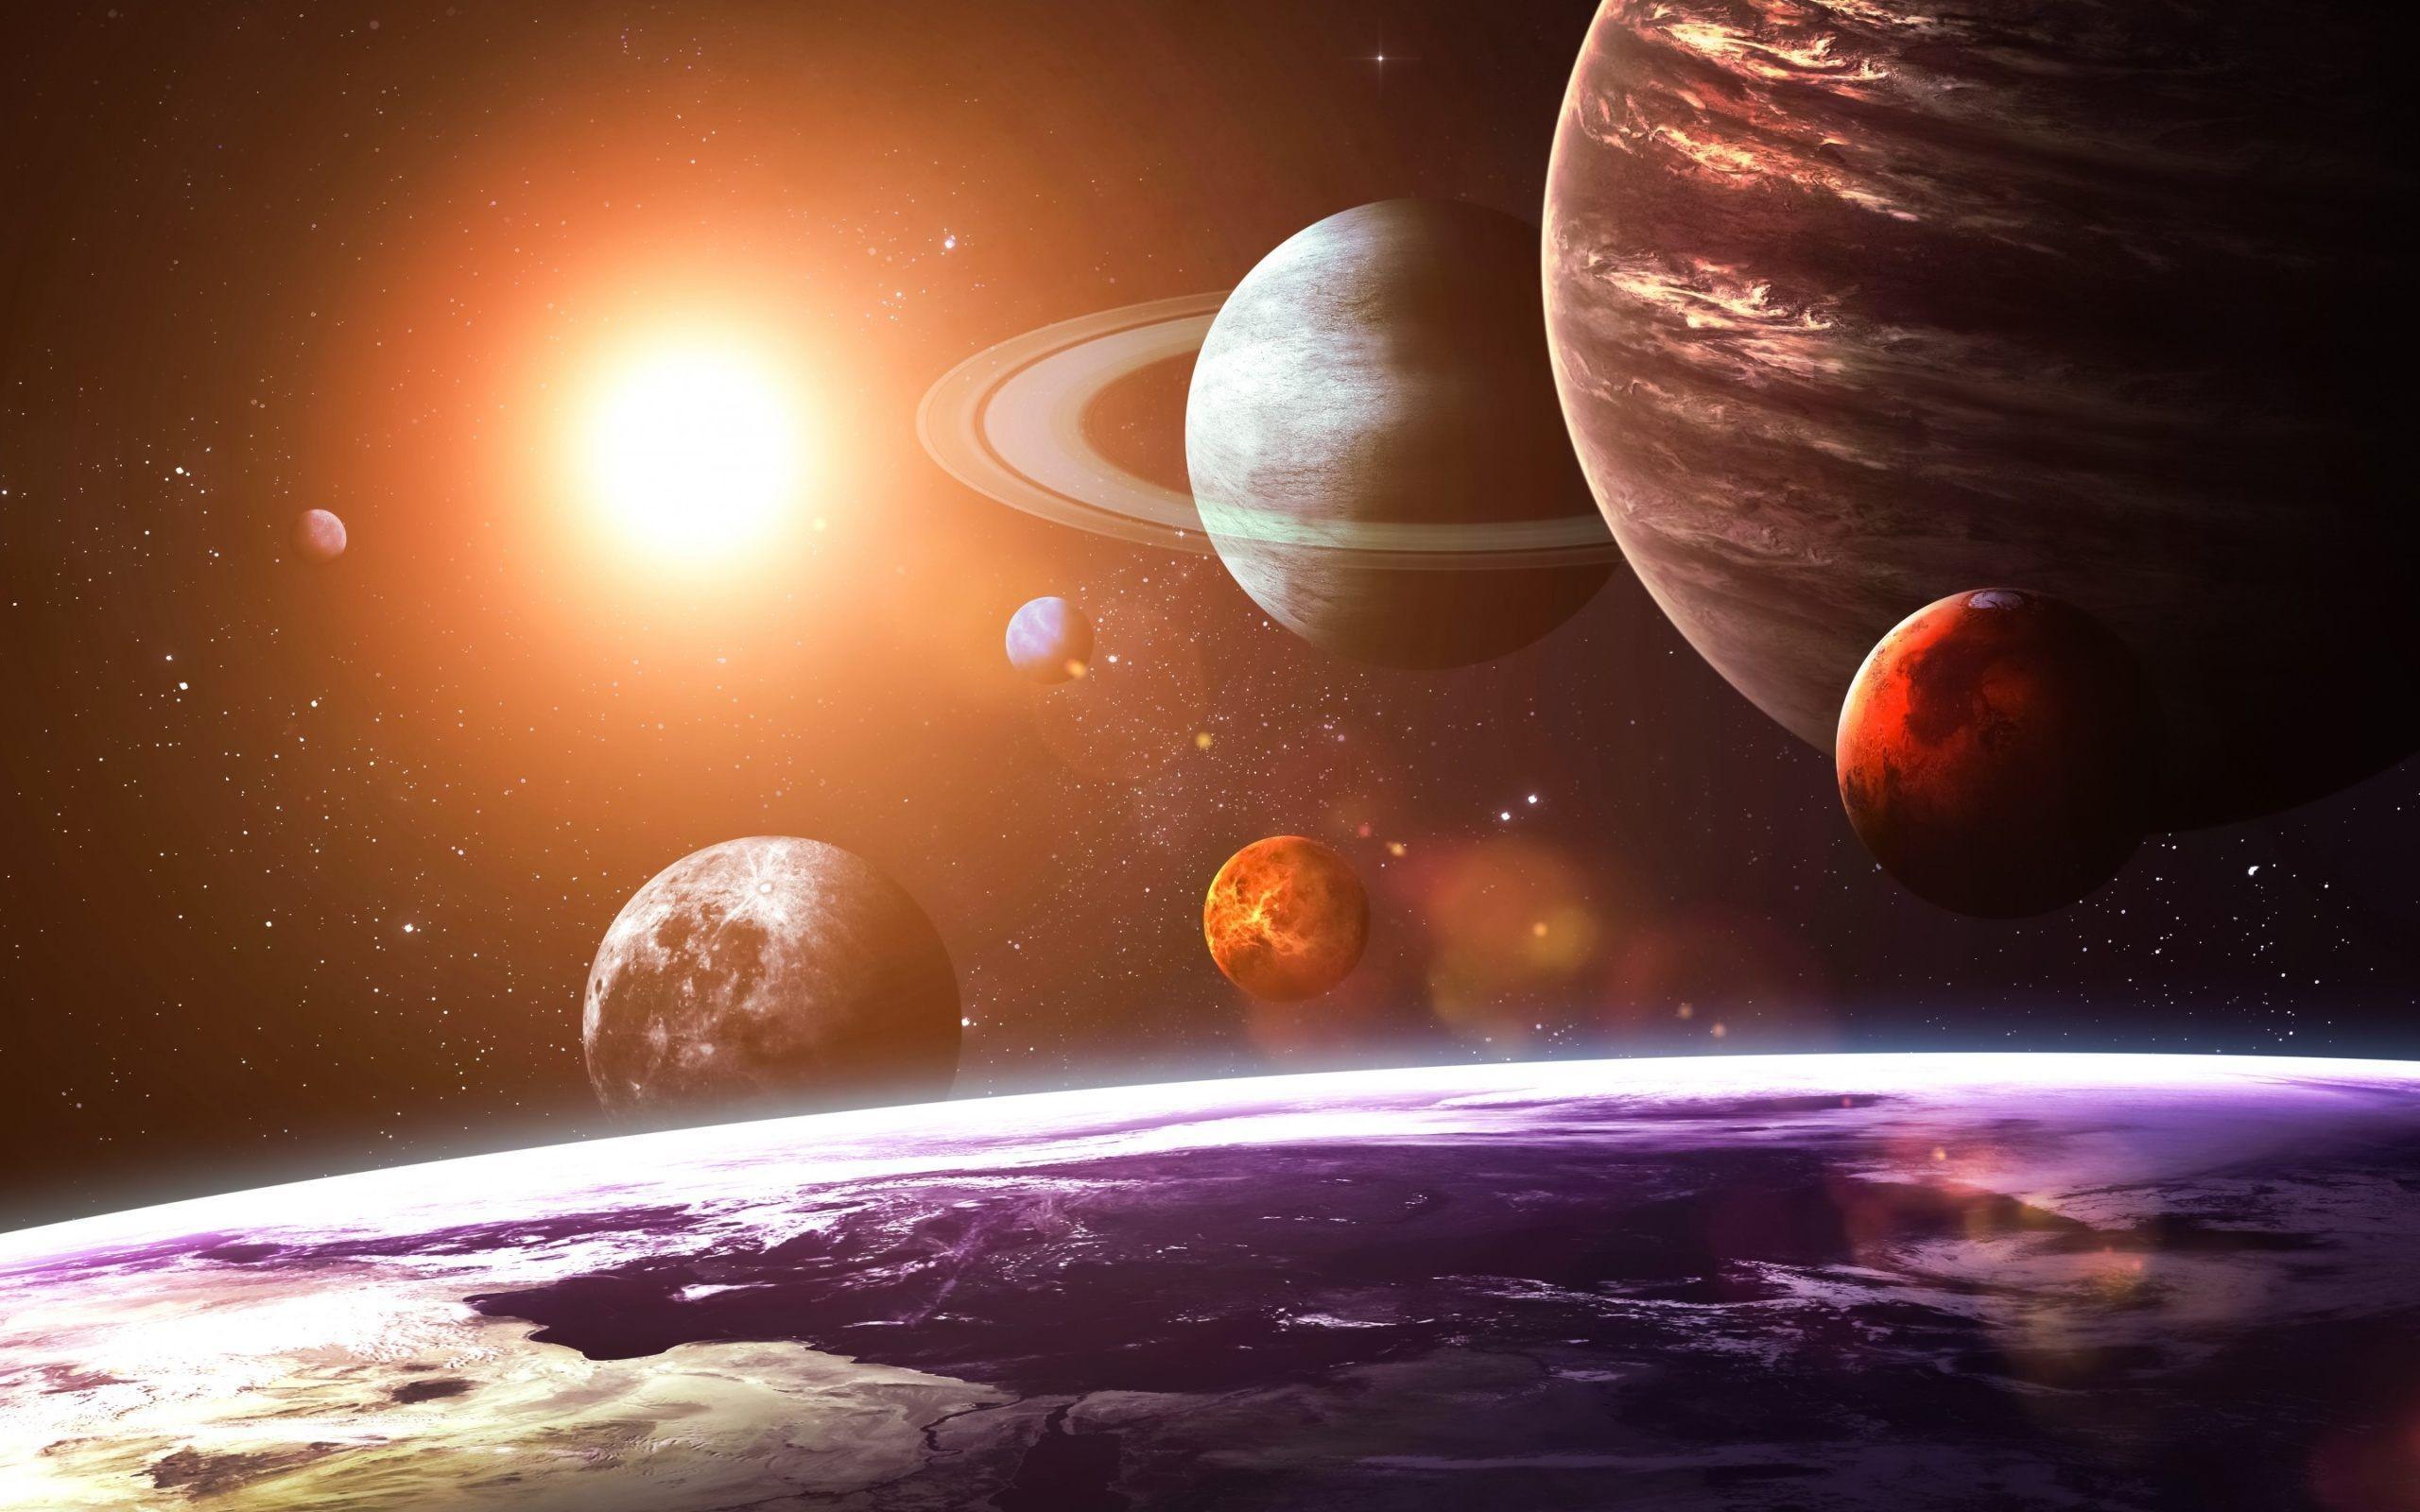 The Solar System Wallpaper HD Download Of Planet & Space